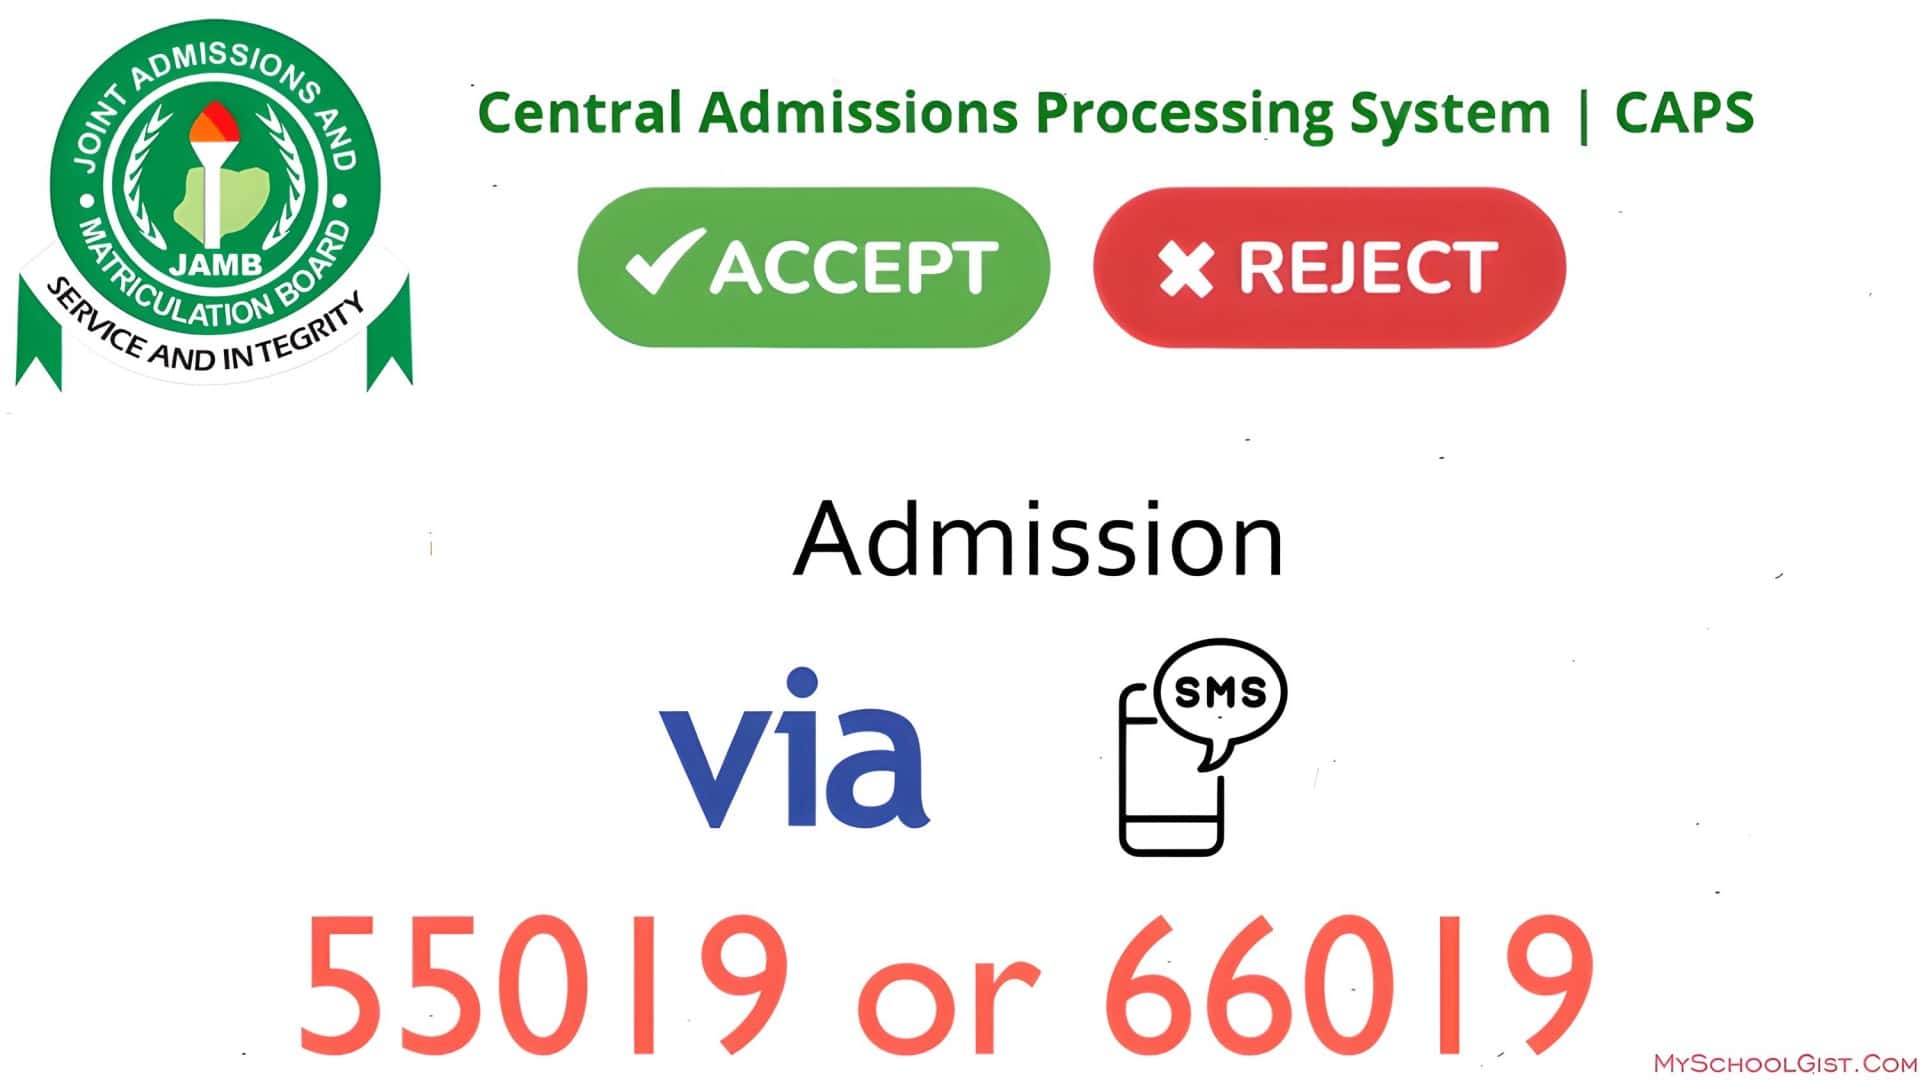 How to Accept or Reject Admission on JAMB CAPS Using SMS